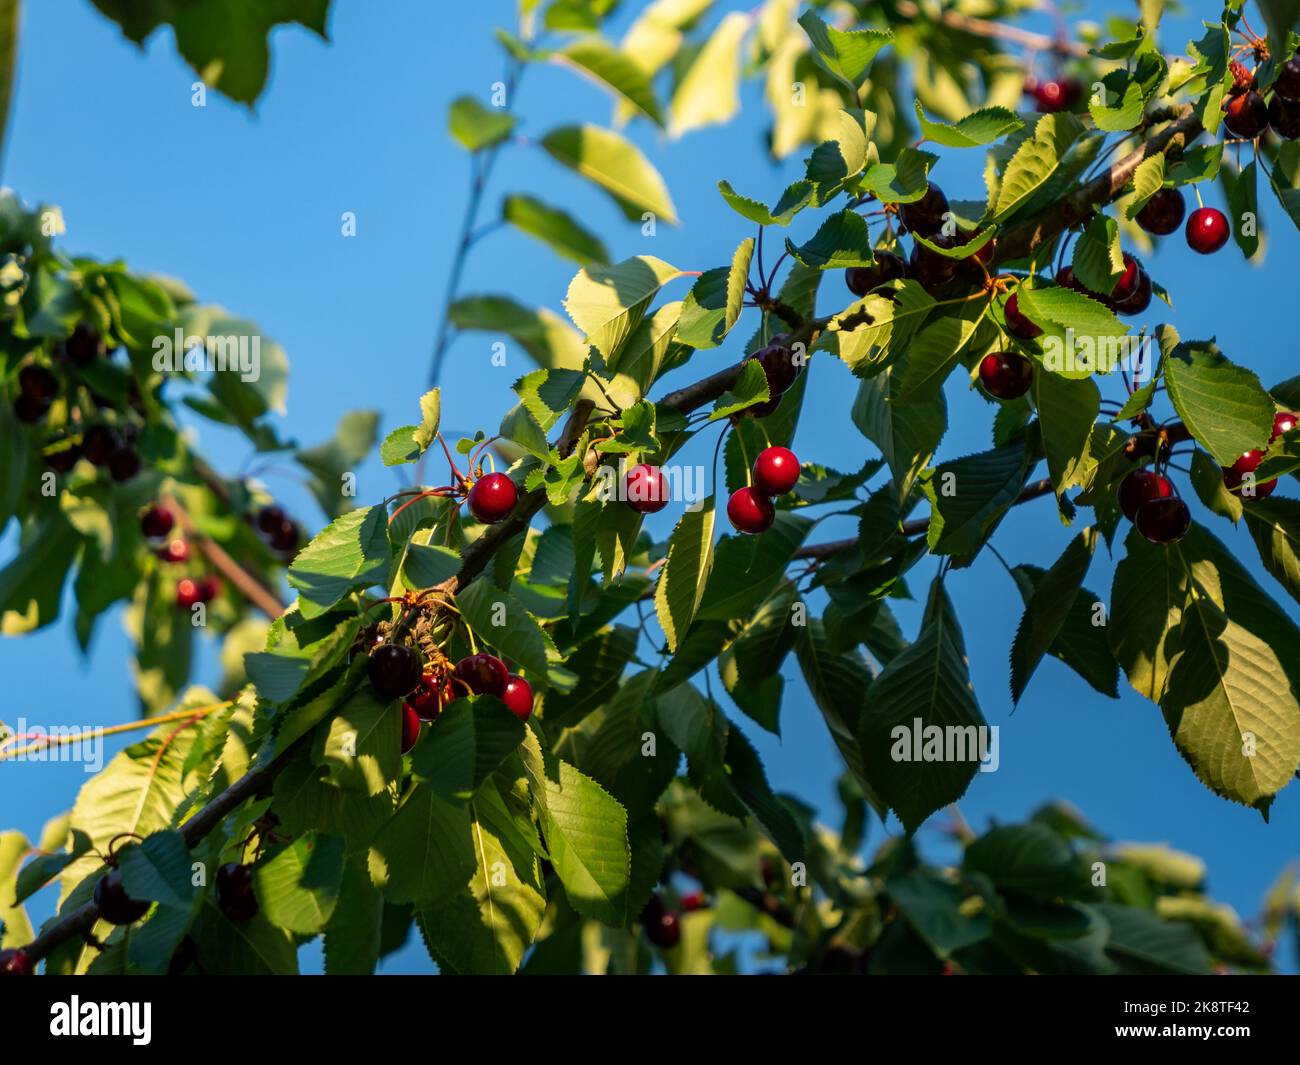 Ripe cherry fruits hanging on a tree. Sweet healthy food in the nature. Beautiful plant parts in the bright sunlight. Idyllic scene in a garden. Stock Photo